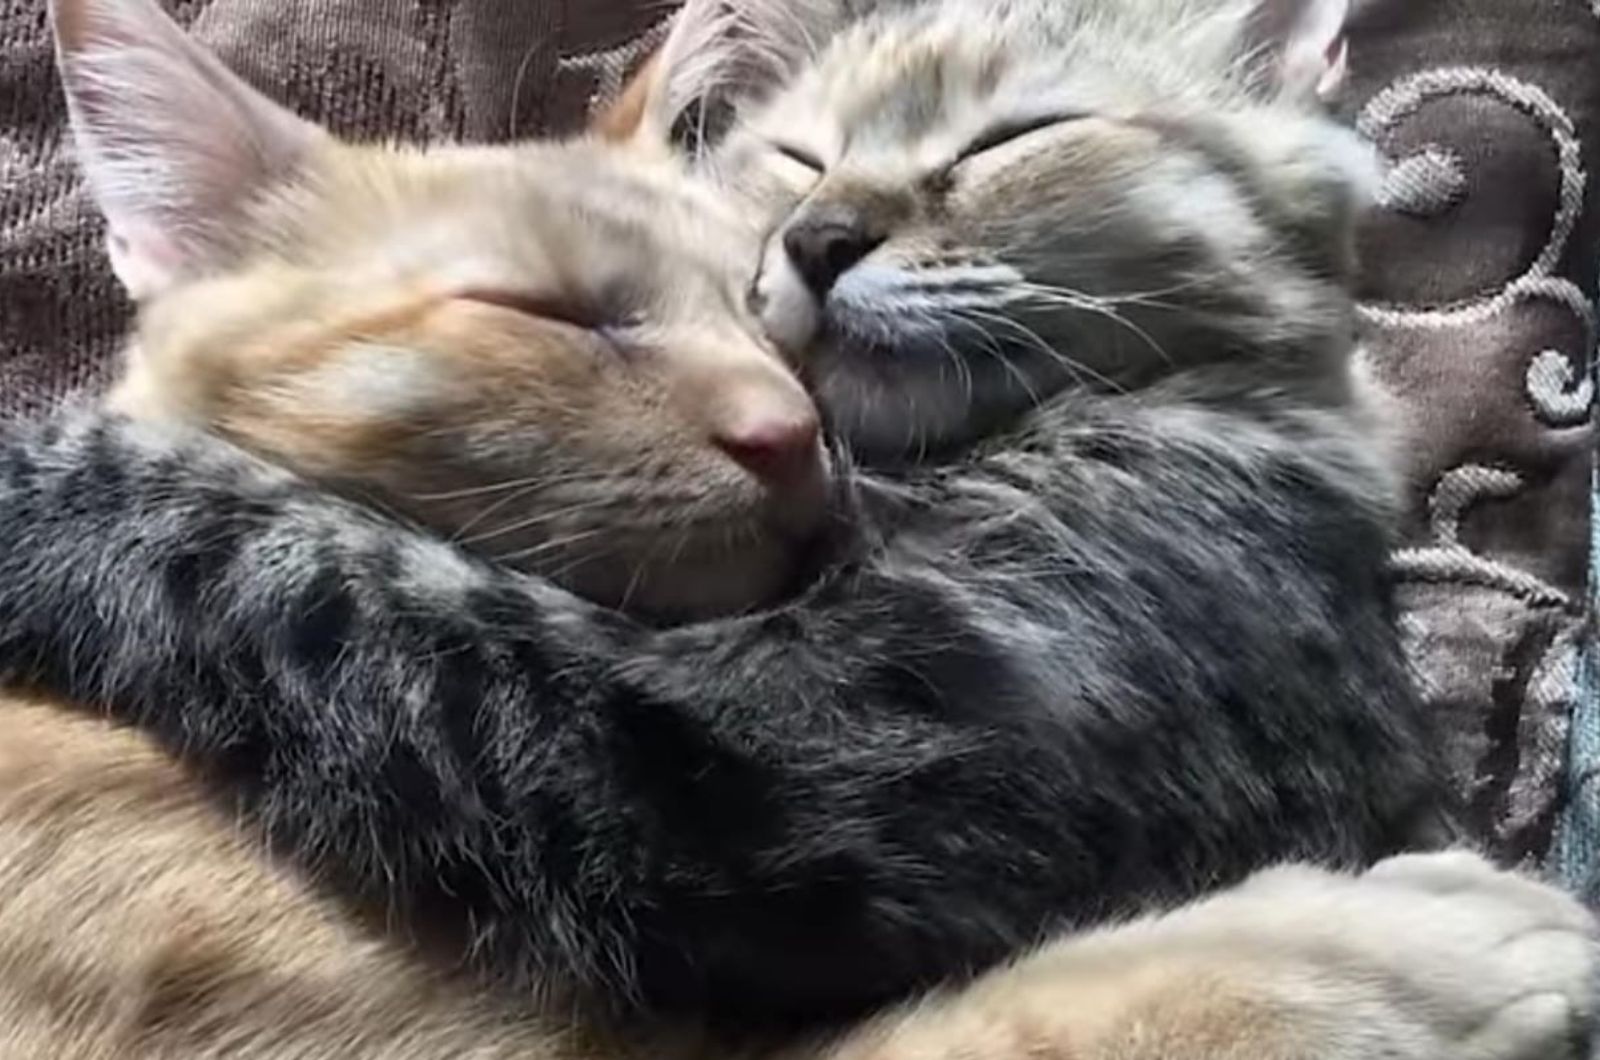 close-up photo of two cats hugging